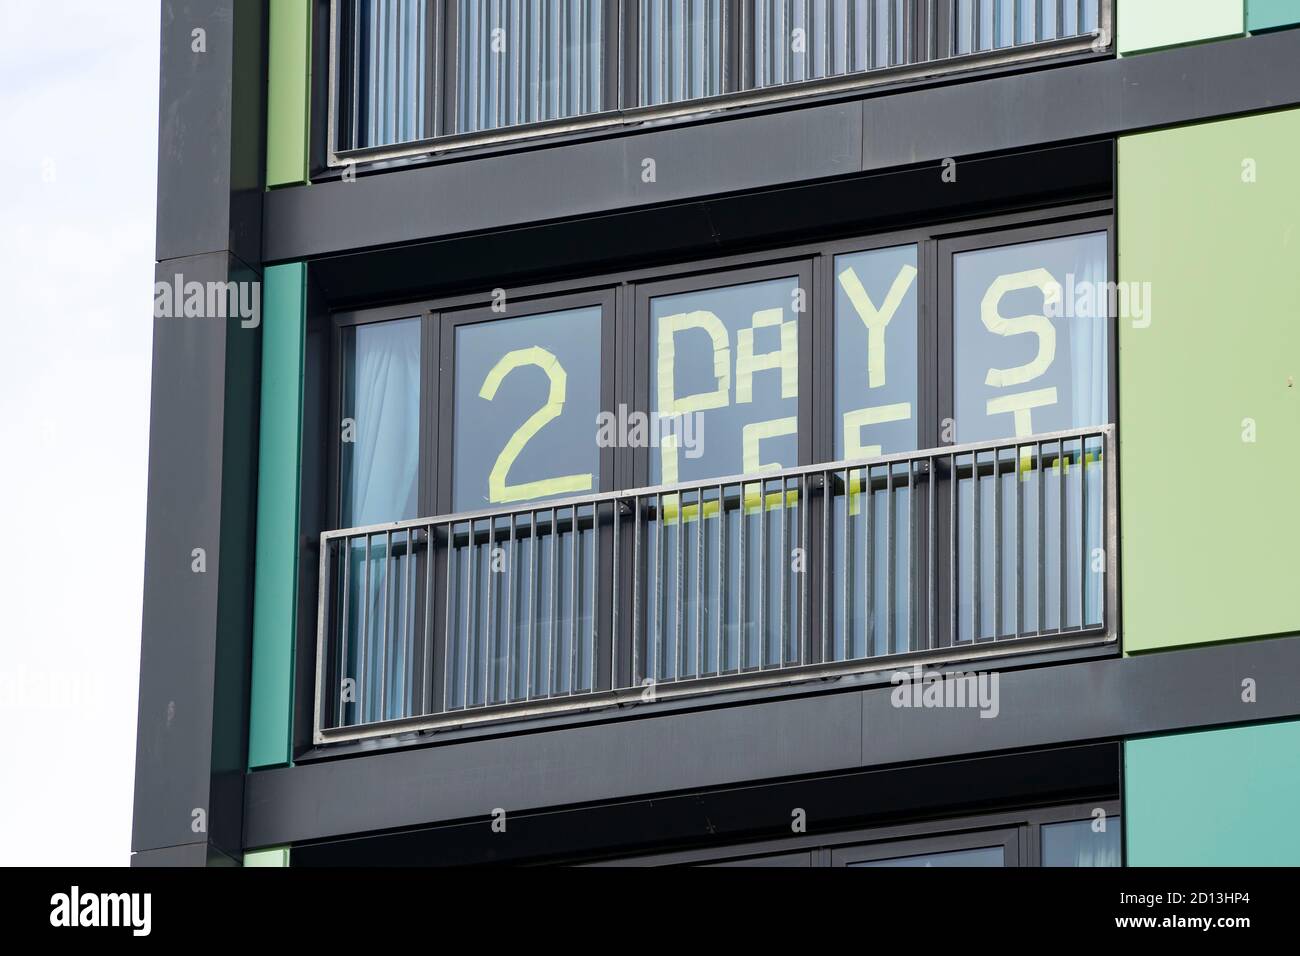 Edinburgh, Scotland, UK. 5 October, 2020. Message in window of Napier University's Bainfield Student apartments at Fountainbridge stating that their period of self-isolation has 2 days remaining. Students at Scottish universities were told to self-isolate after several outbreaks of Covid-19 were recorded. Iain Masterton/Alamy Live News Stock Photo